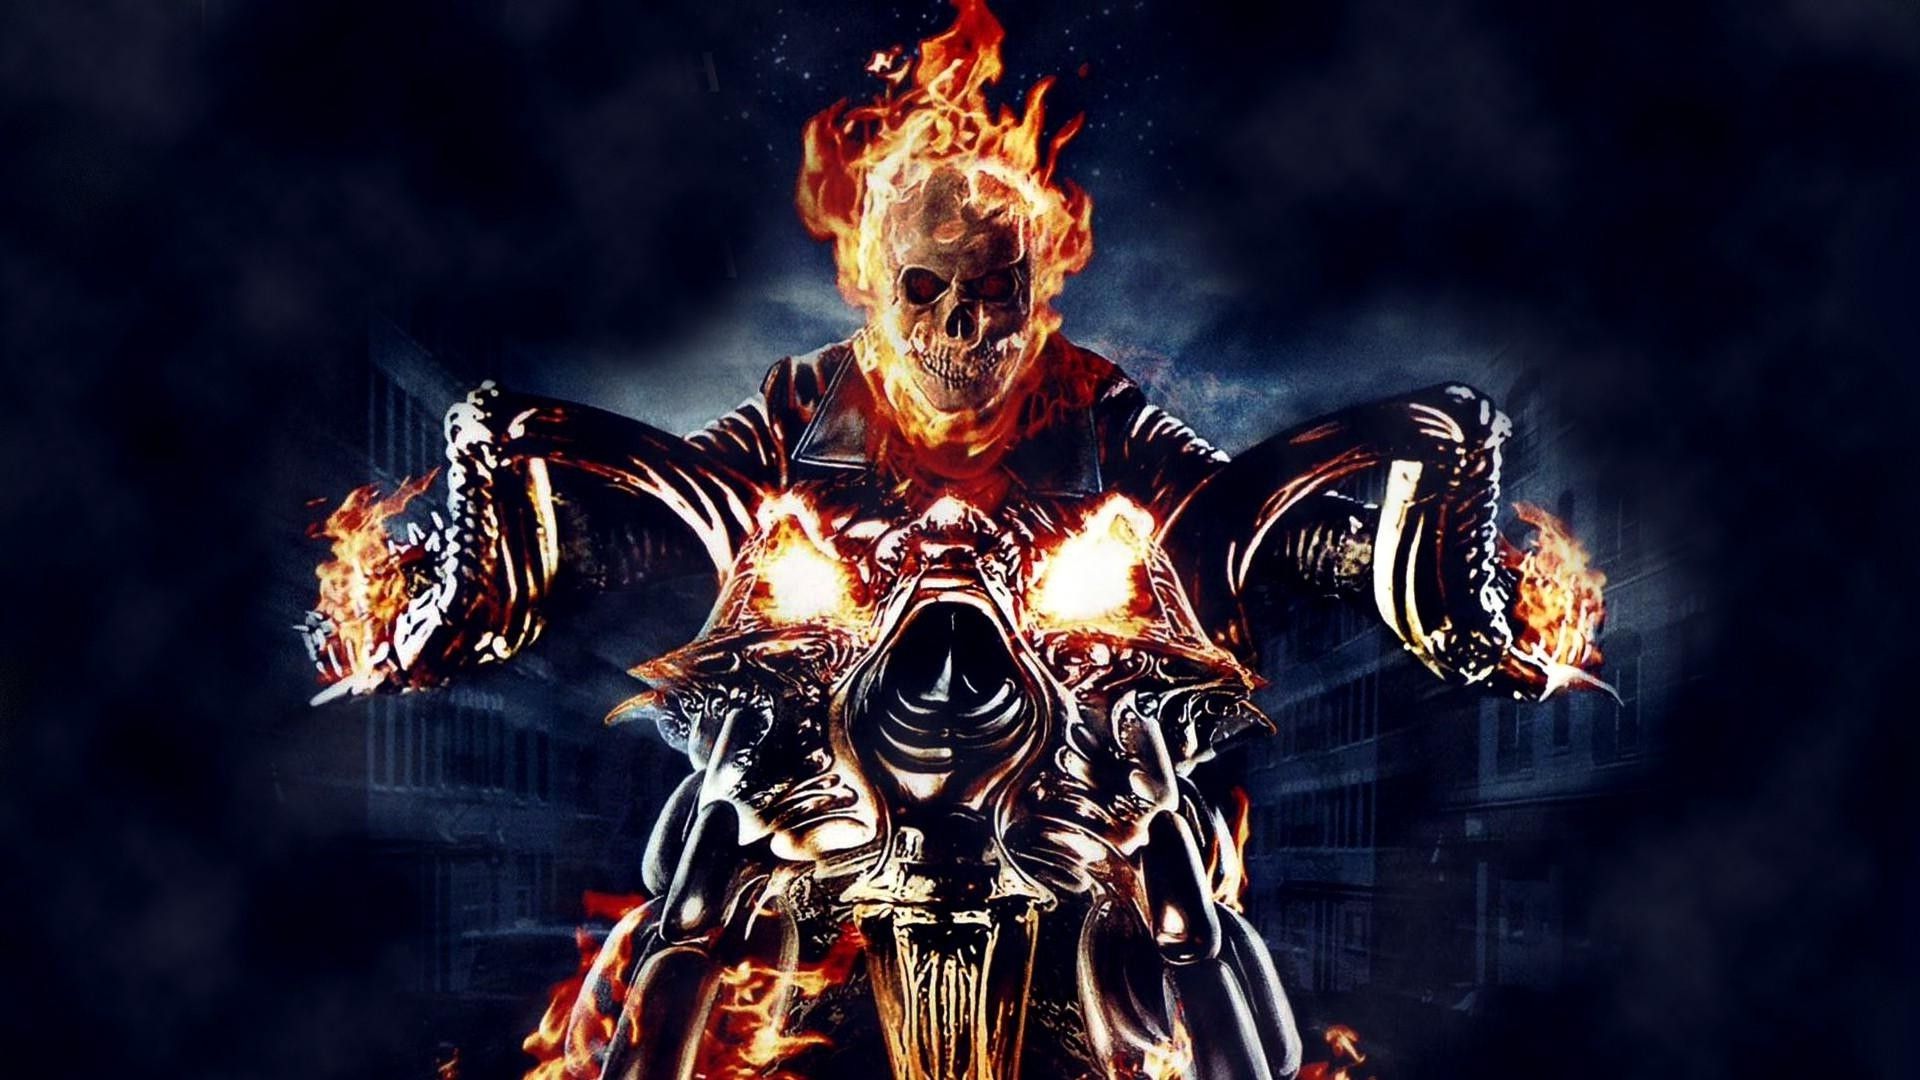 Ghost Rider, Skull, Fire, Motorcycle, Comics, Graphic Novels